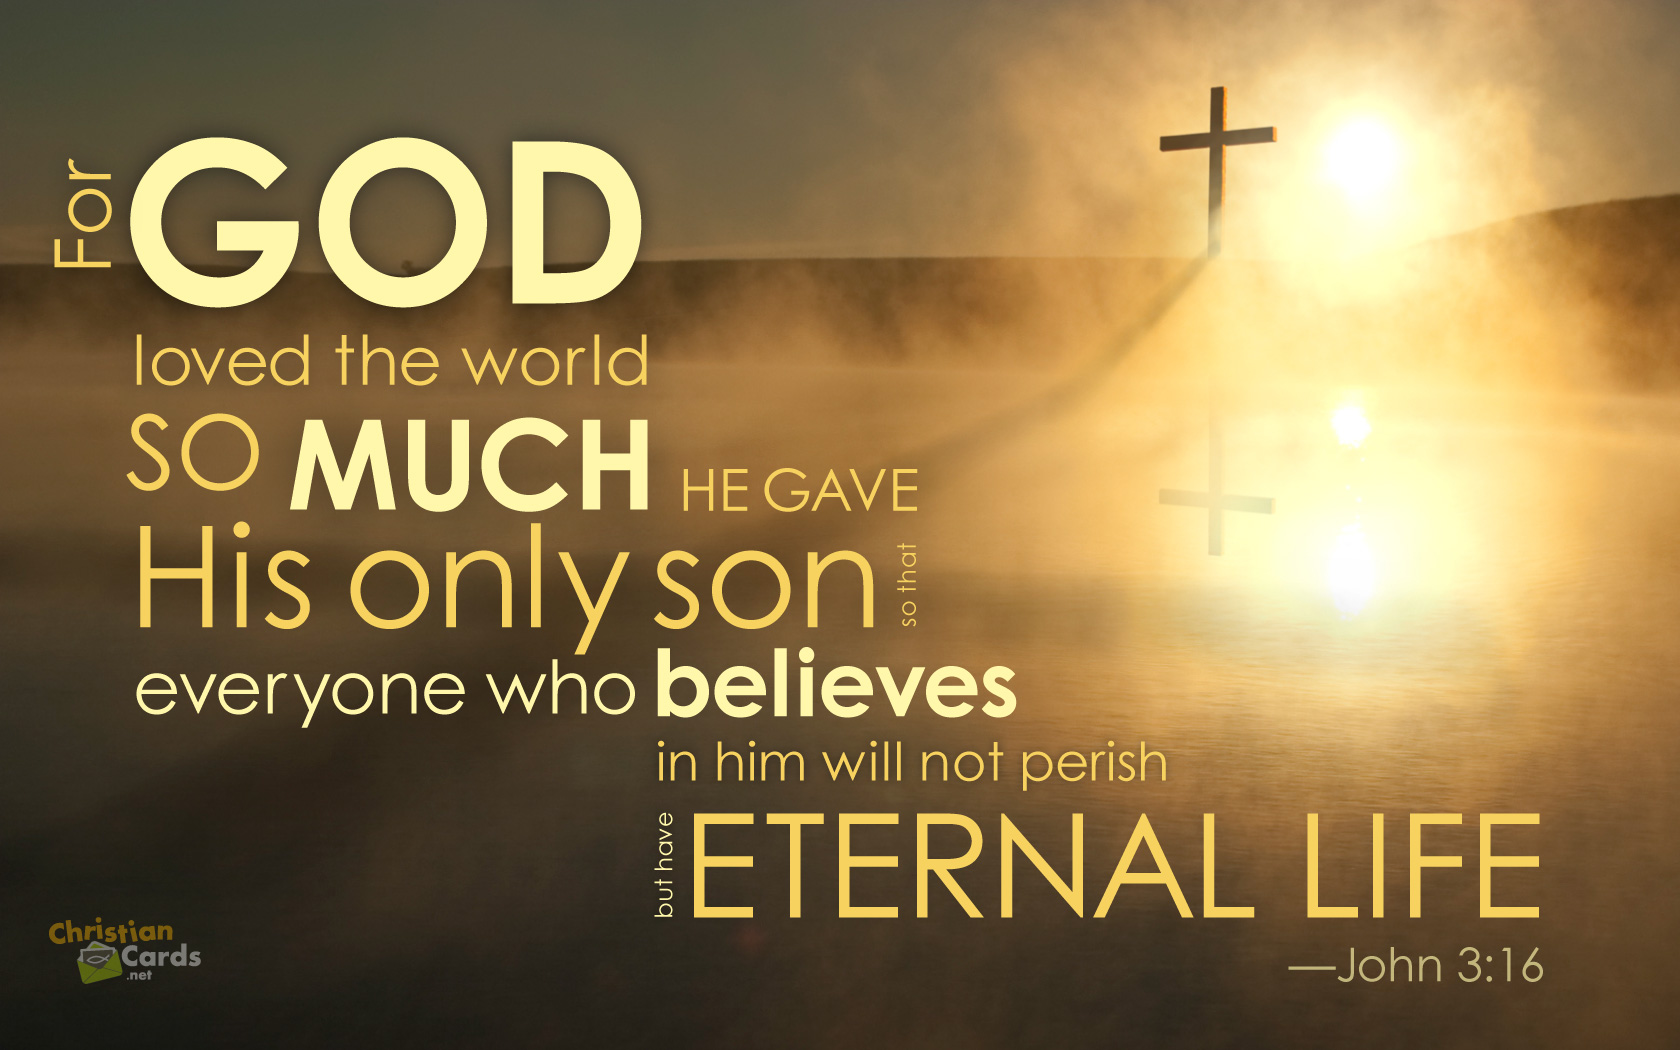 God So Loved The World That He Gave His Only Son So - HD Wallpaper 